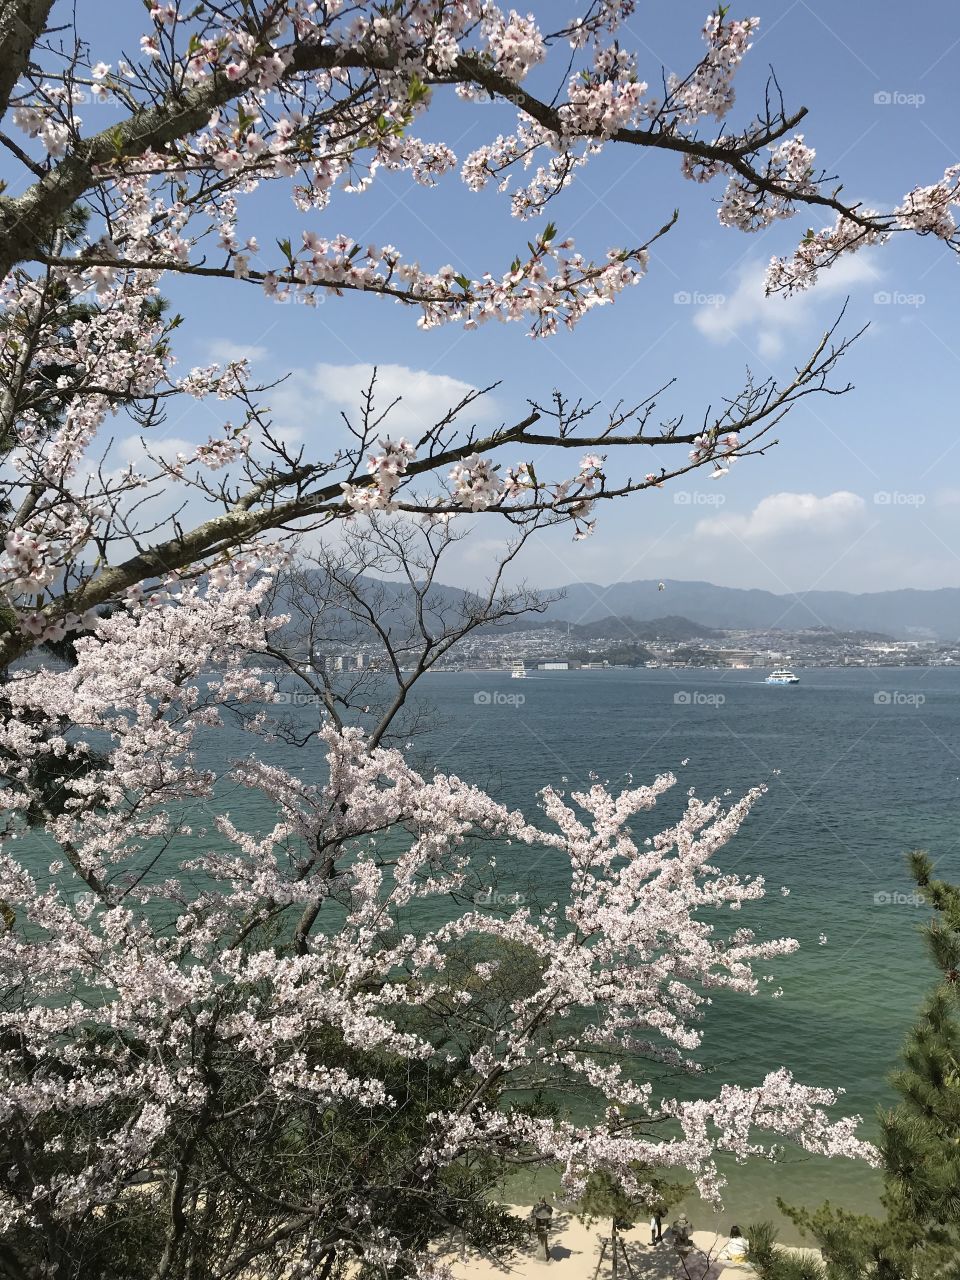 Cherry blossoms and the ocean